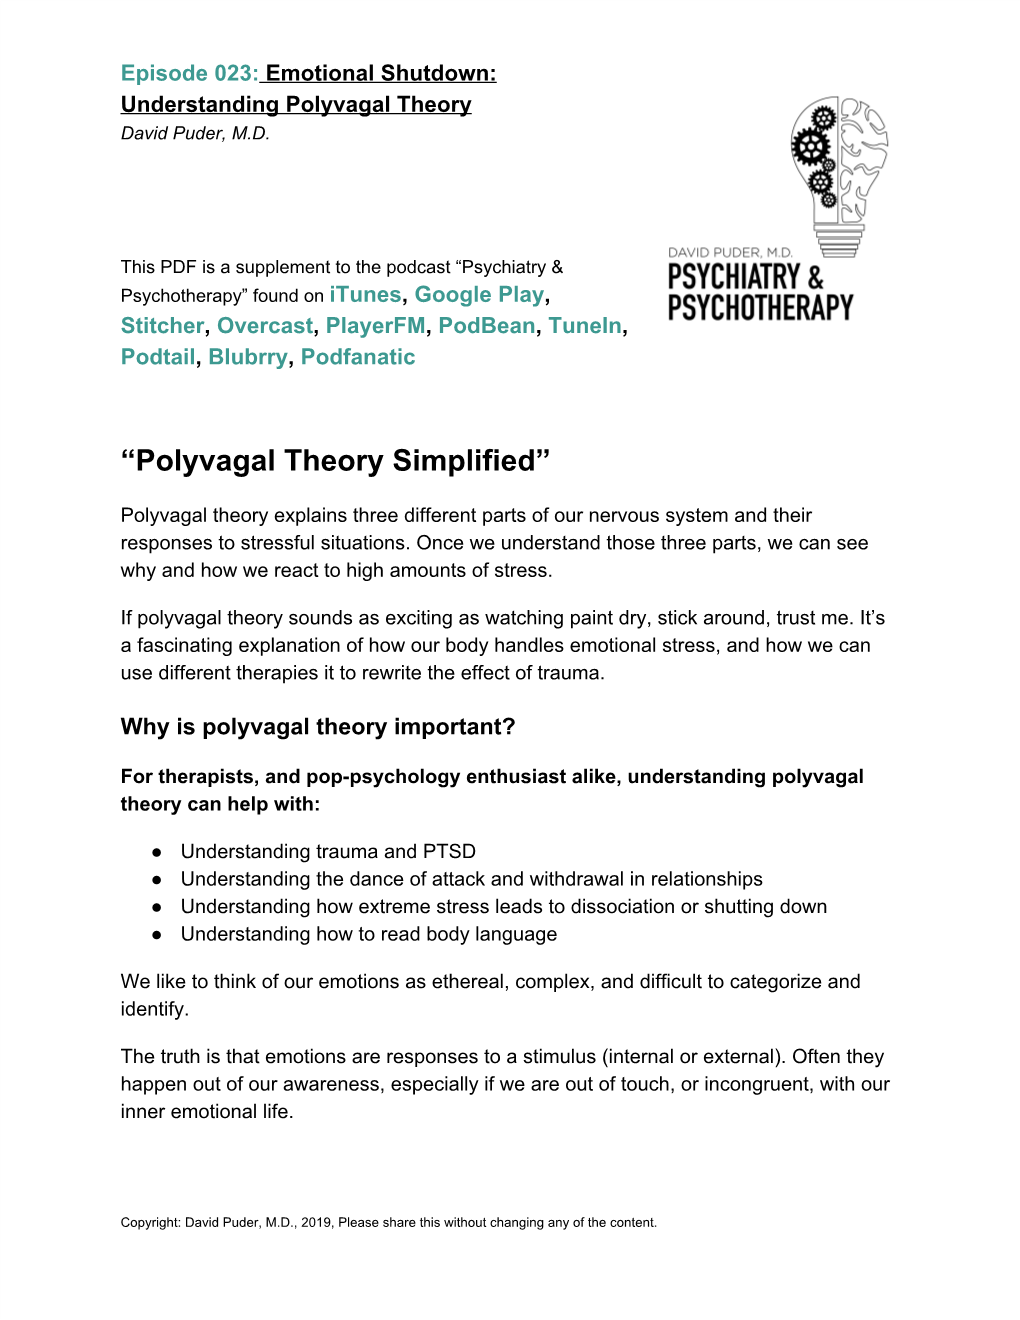 “Polyvagal Theory Simplified”